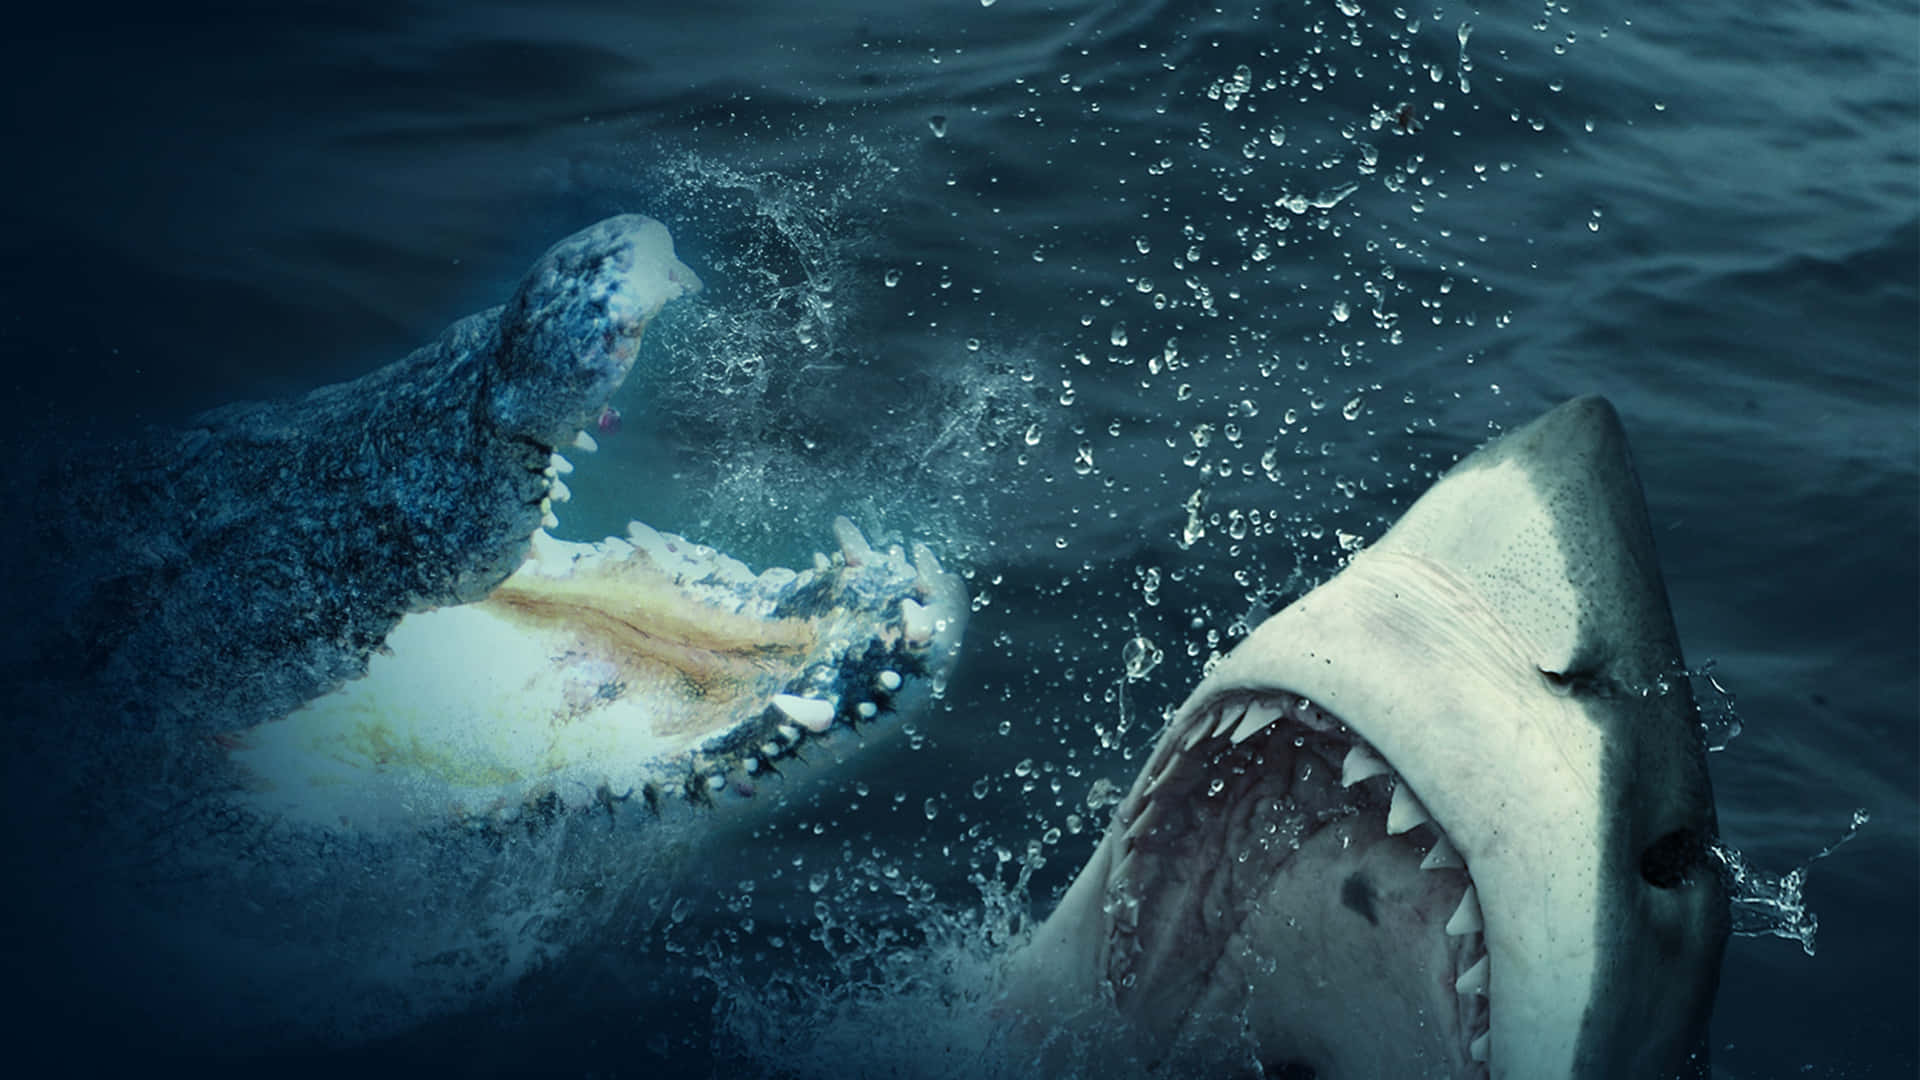 Crocodile And Shark Scary Ocean Picture 2599 x 1462 Picture